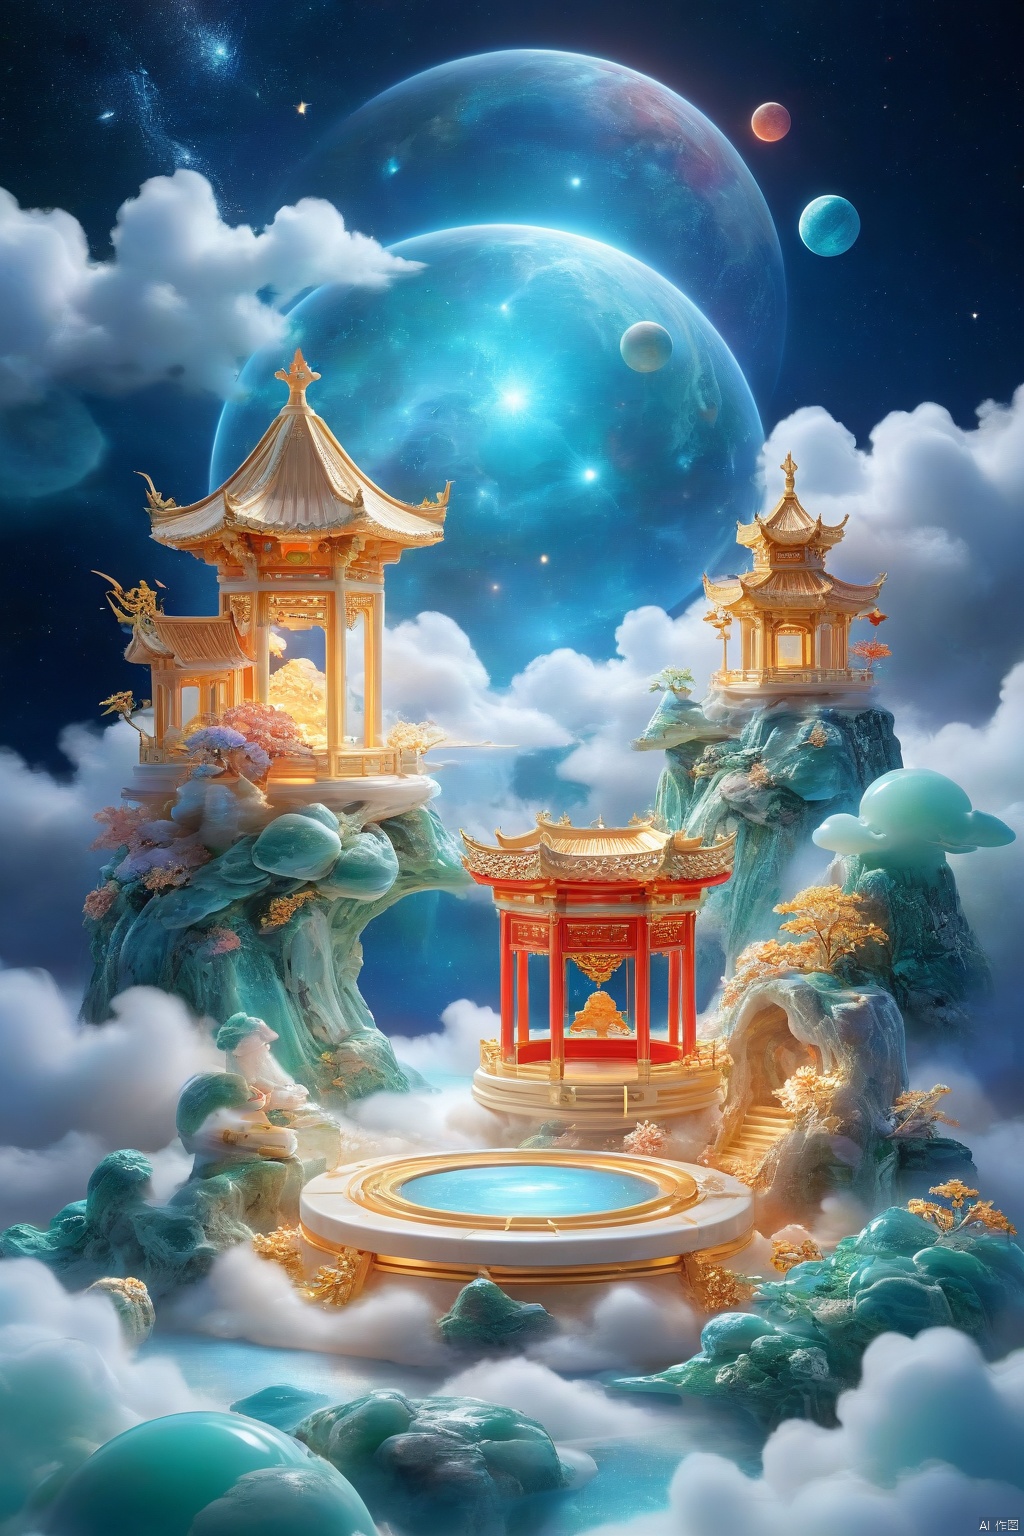 professional 3d model,anime artwork pixar,3d style,good shine,OC rendering,highly detailed,volumetric,dramatic lighting,3d\(hubgstyle)\,
HUBG_Chinese_Jade,
a round podium on the ground in the middle,clouds,starry sky,planets in the sky,glowing beam in the background,beautiful colorful background,very beautiful,masterpiece,best quality,super detail,anime style,key visual,vibrant,studio anime, 